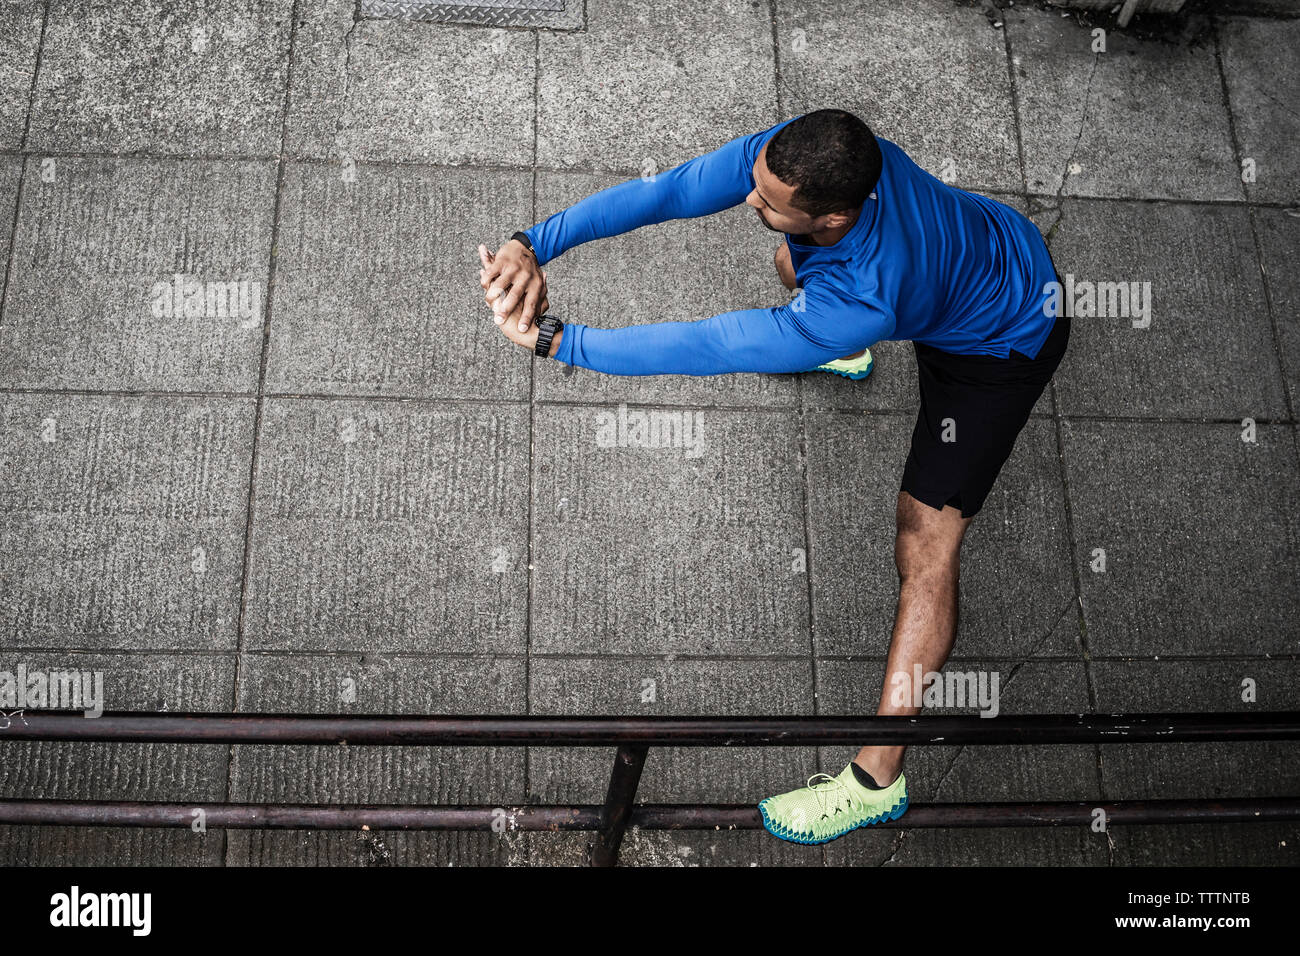 High angle view of man exercising on street Stock Photo